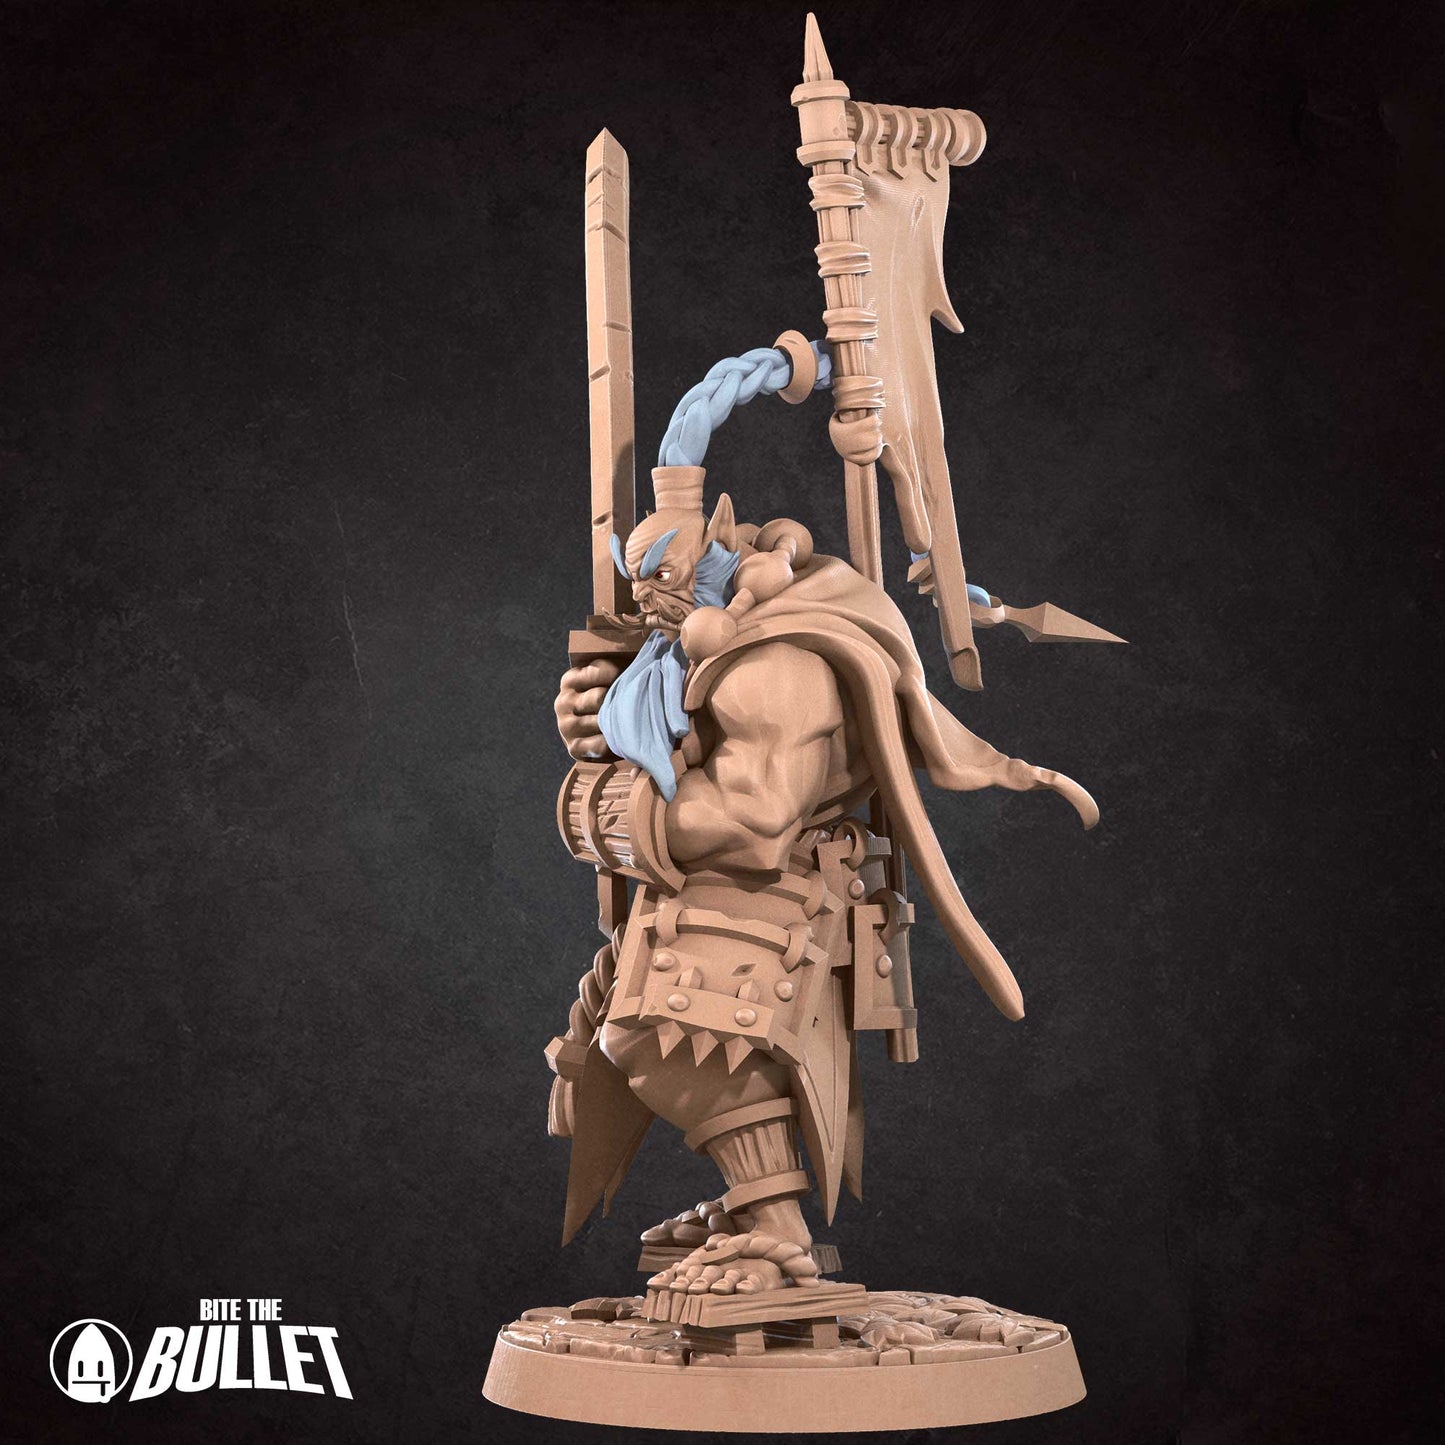 DnD Barbarian - Fighter - Miniature - Orc - Paladin Thrakka  Barbarian - Fighter - Miniature - Orc - Paladin sold by DoubleHitShop